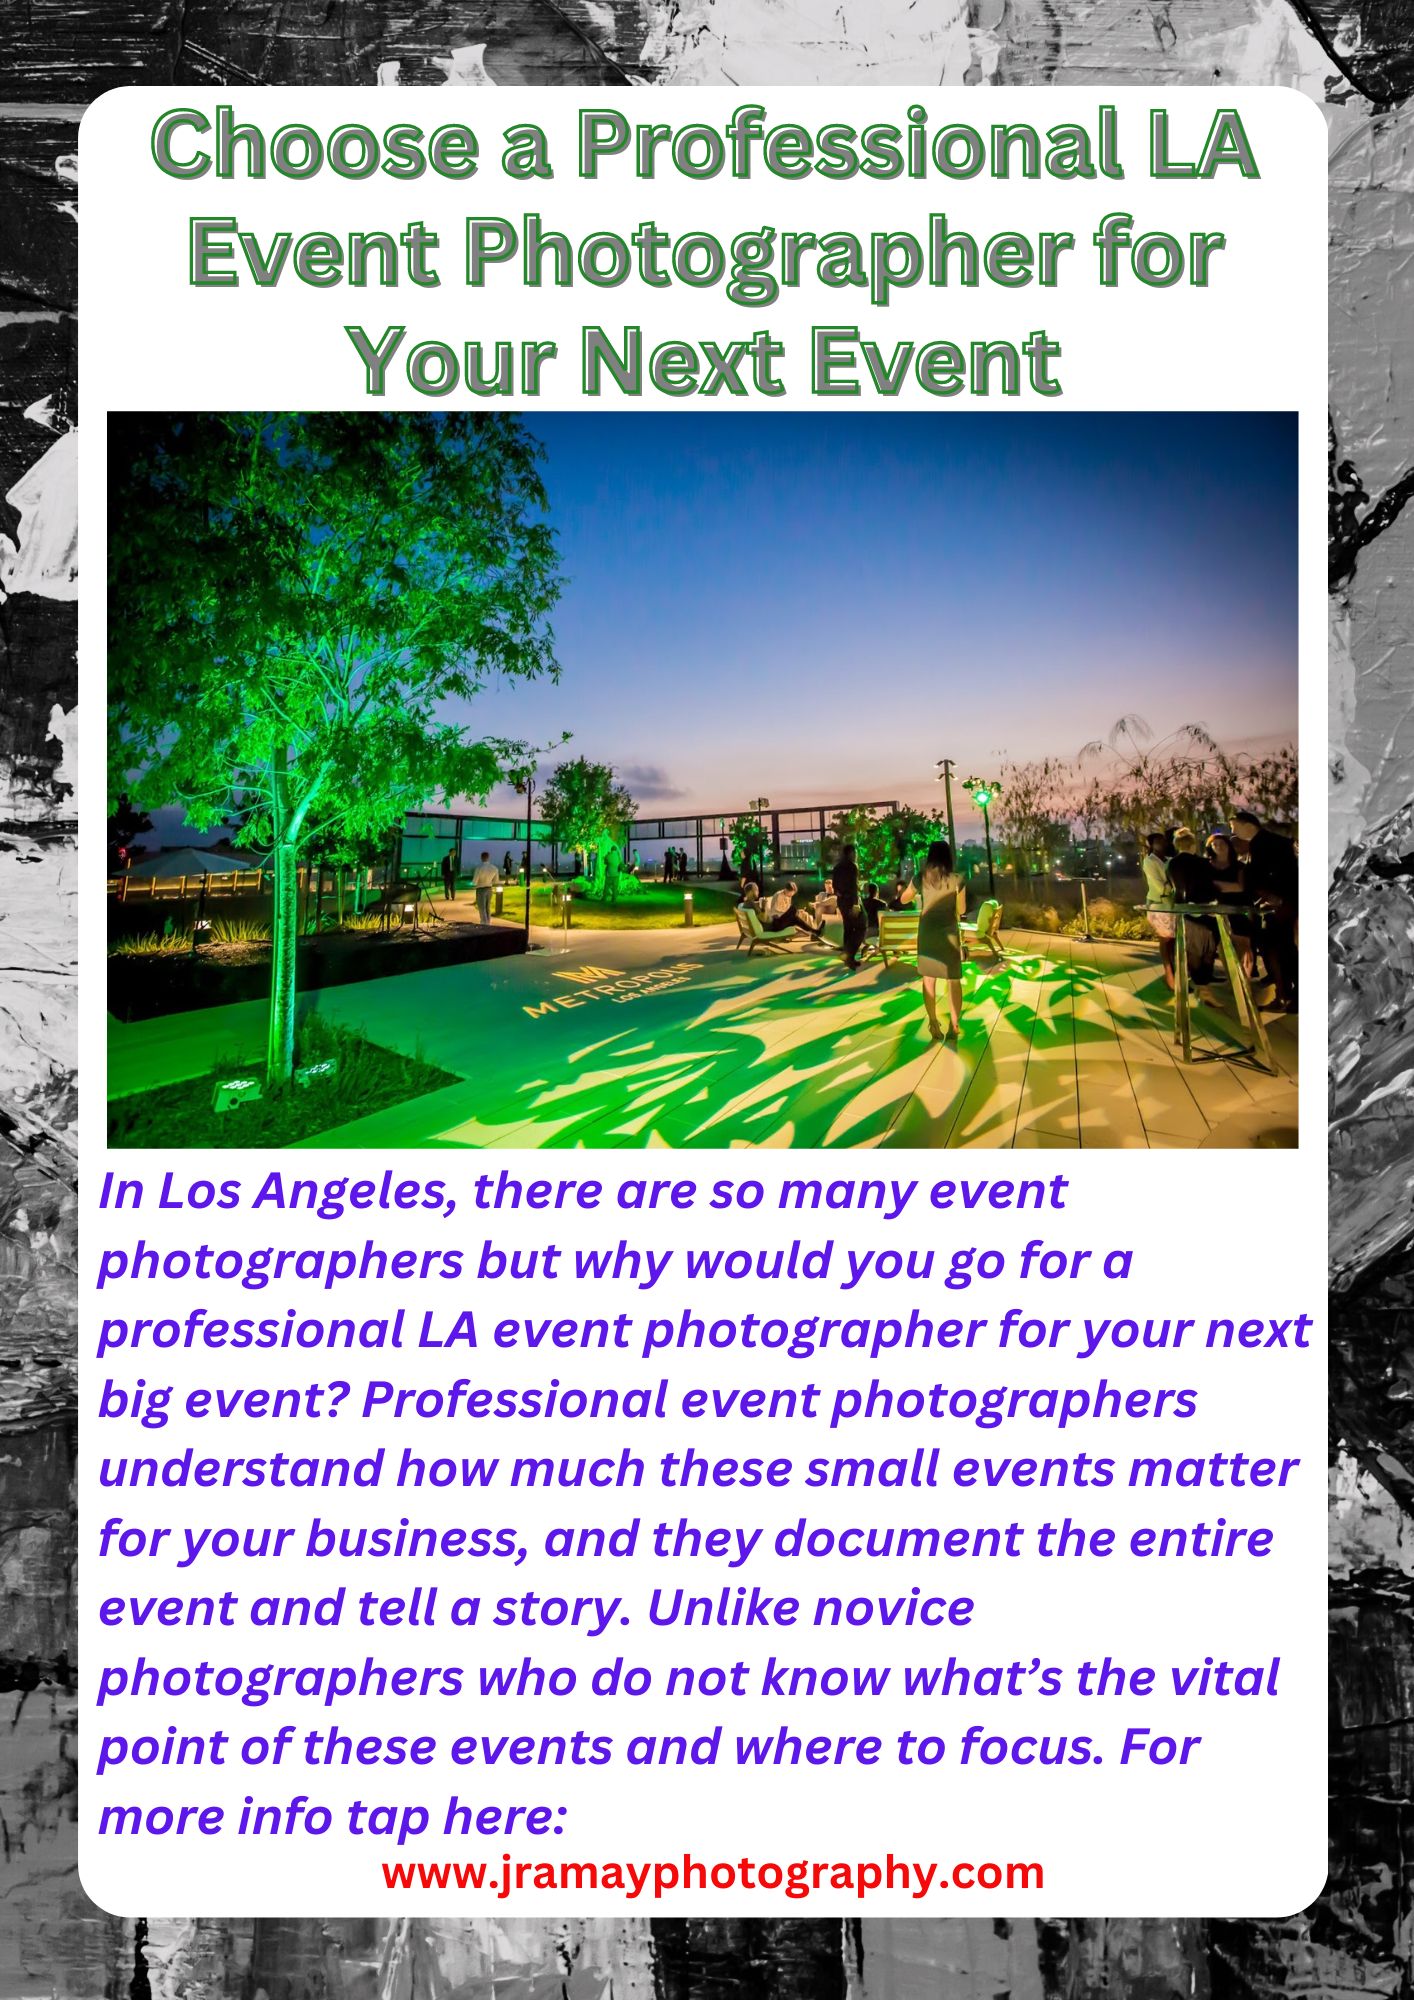 Choose a Professional LA Event Photographer for Your Next Event.jpg  by jramayphotography